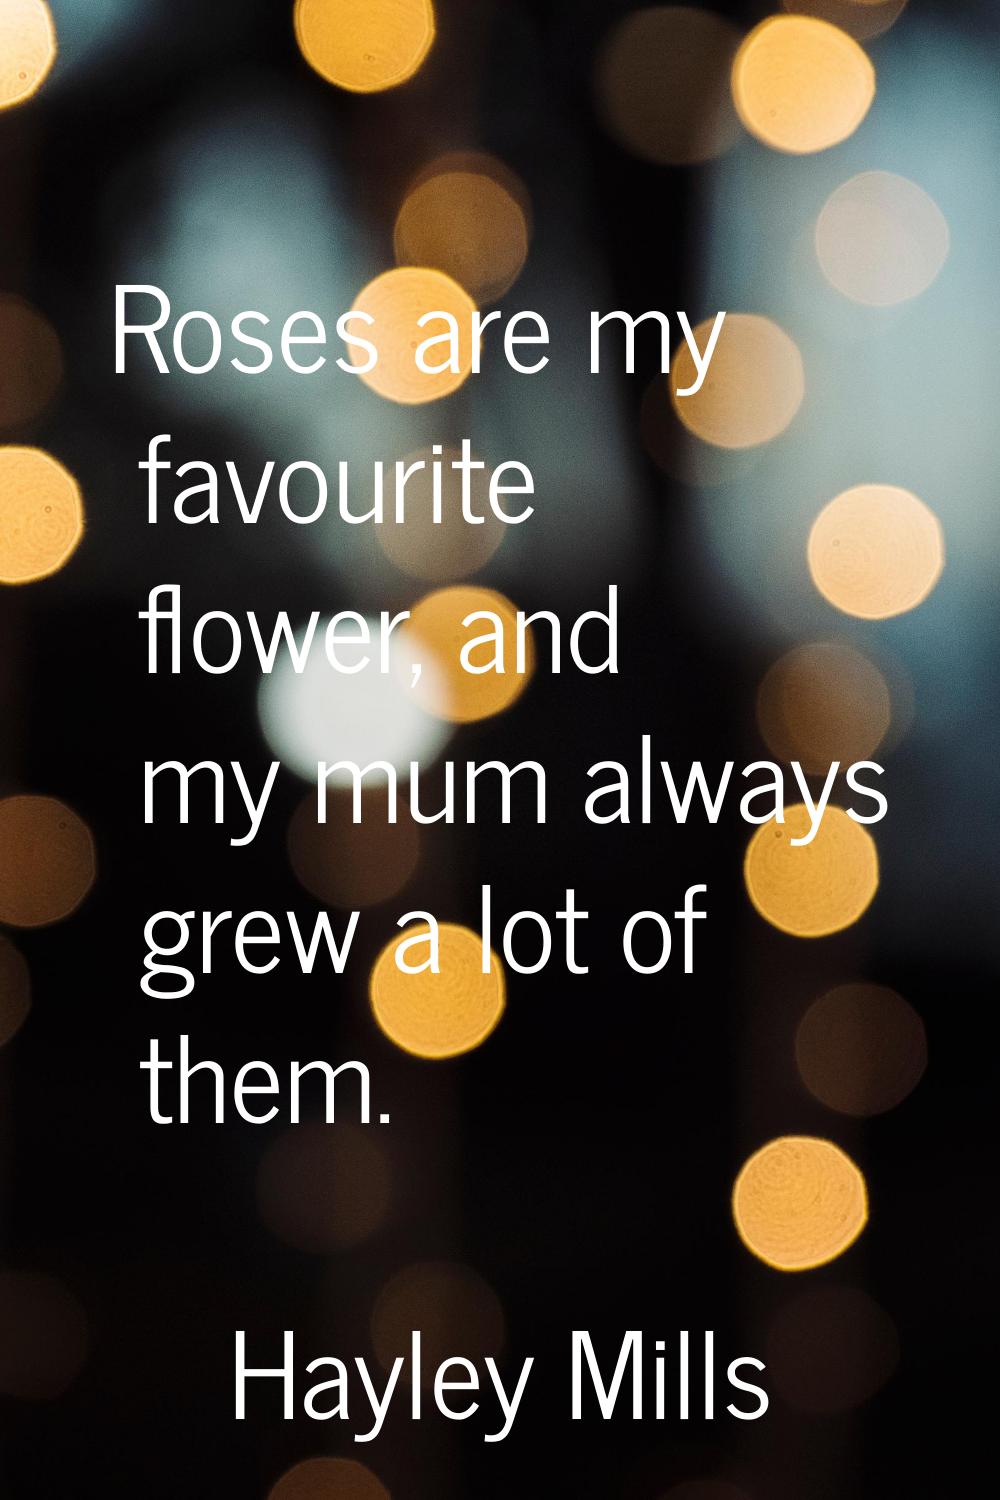 Roses are my favourite flower, and my mum always grew a lot of them.